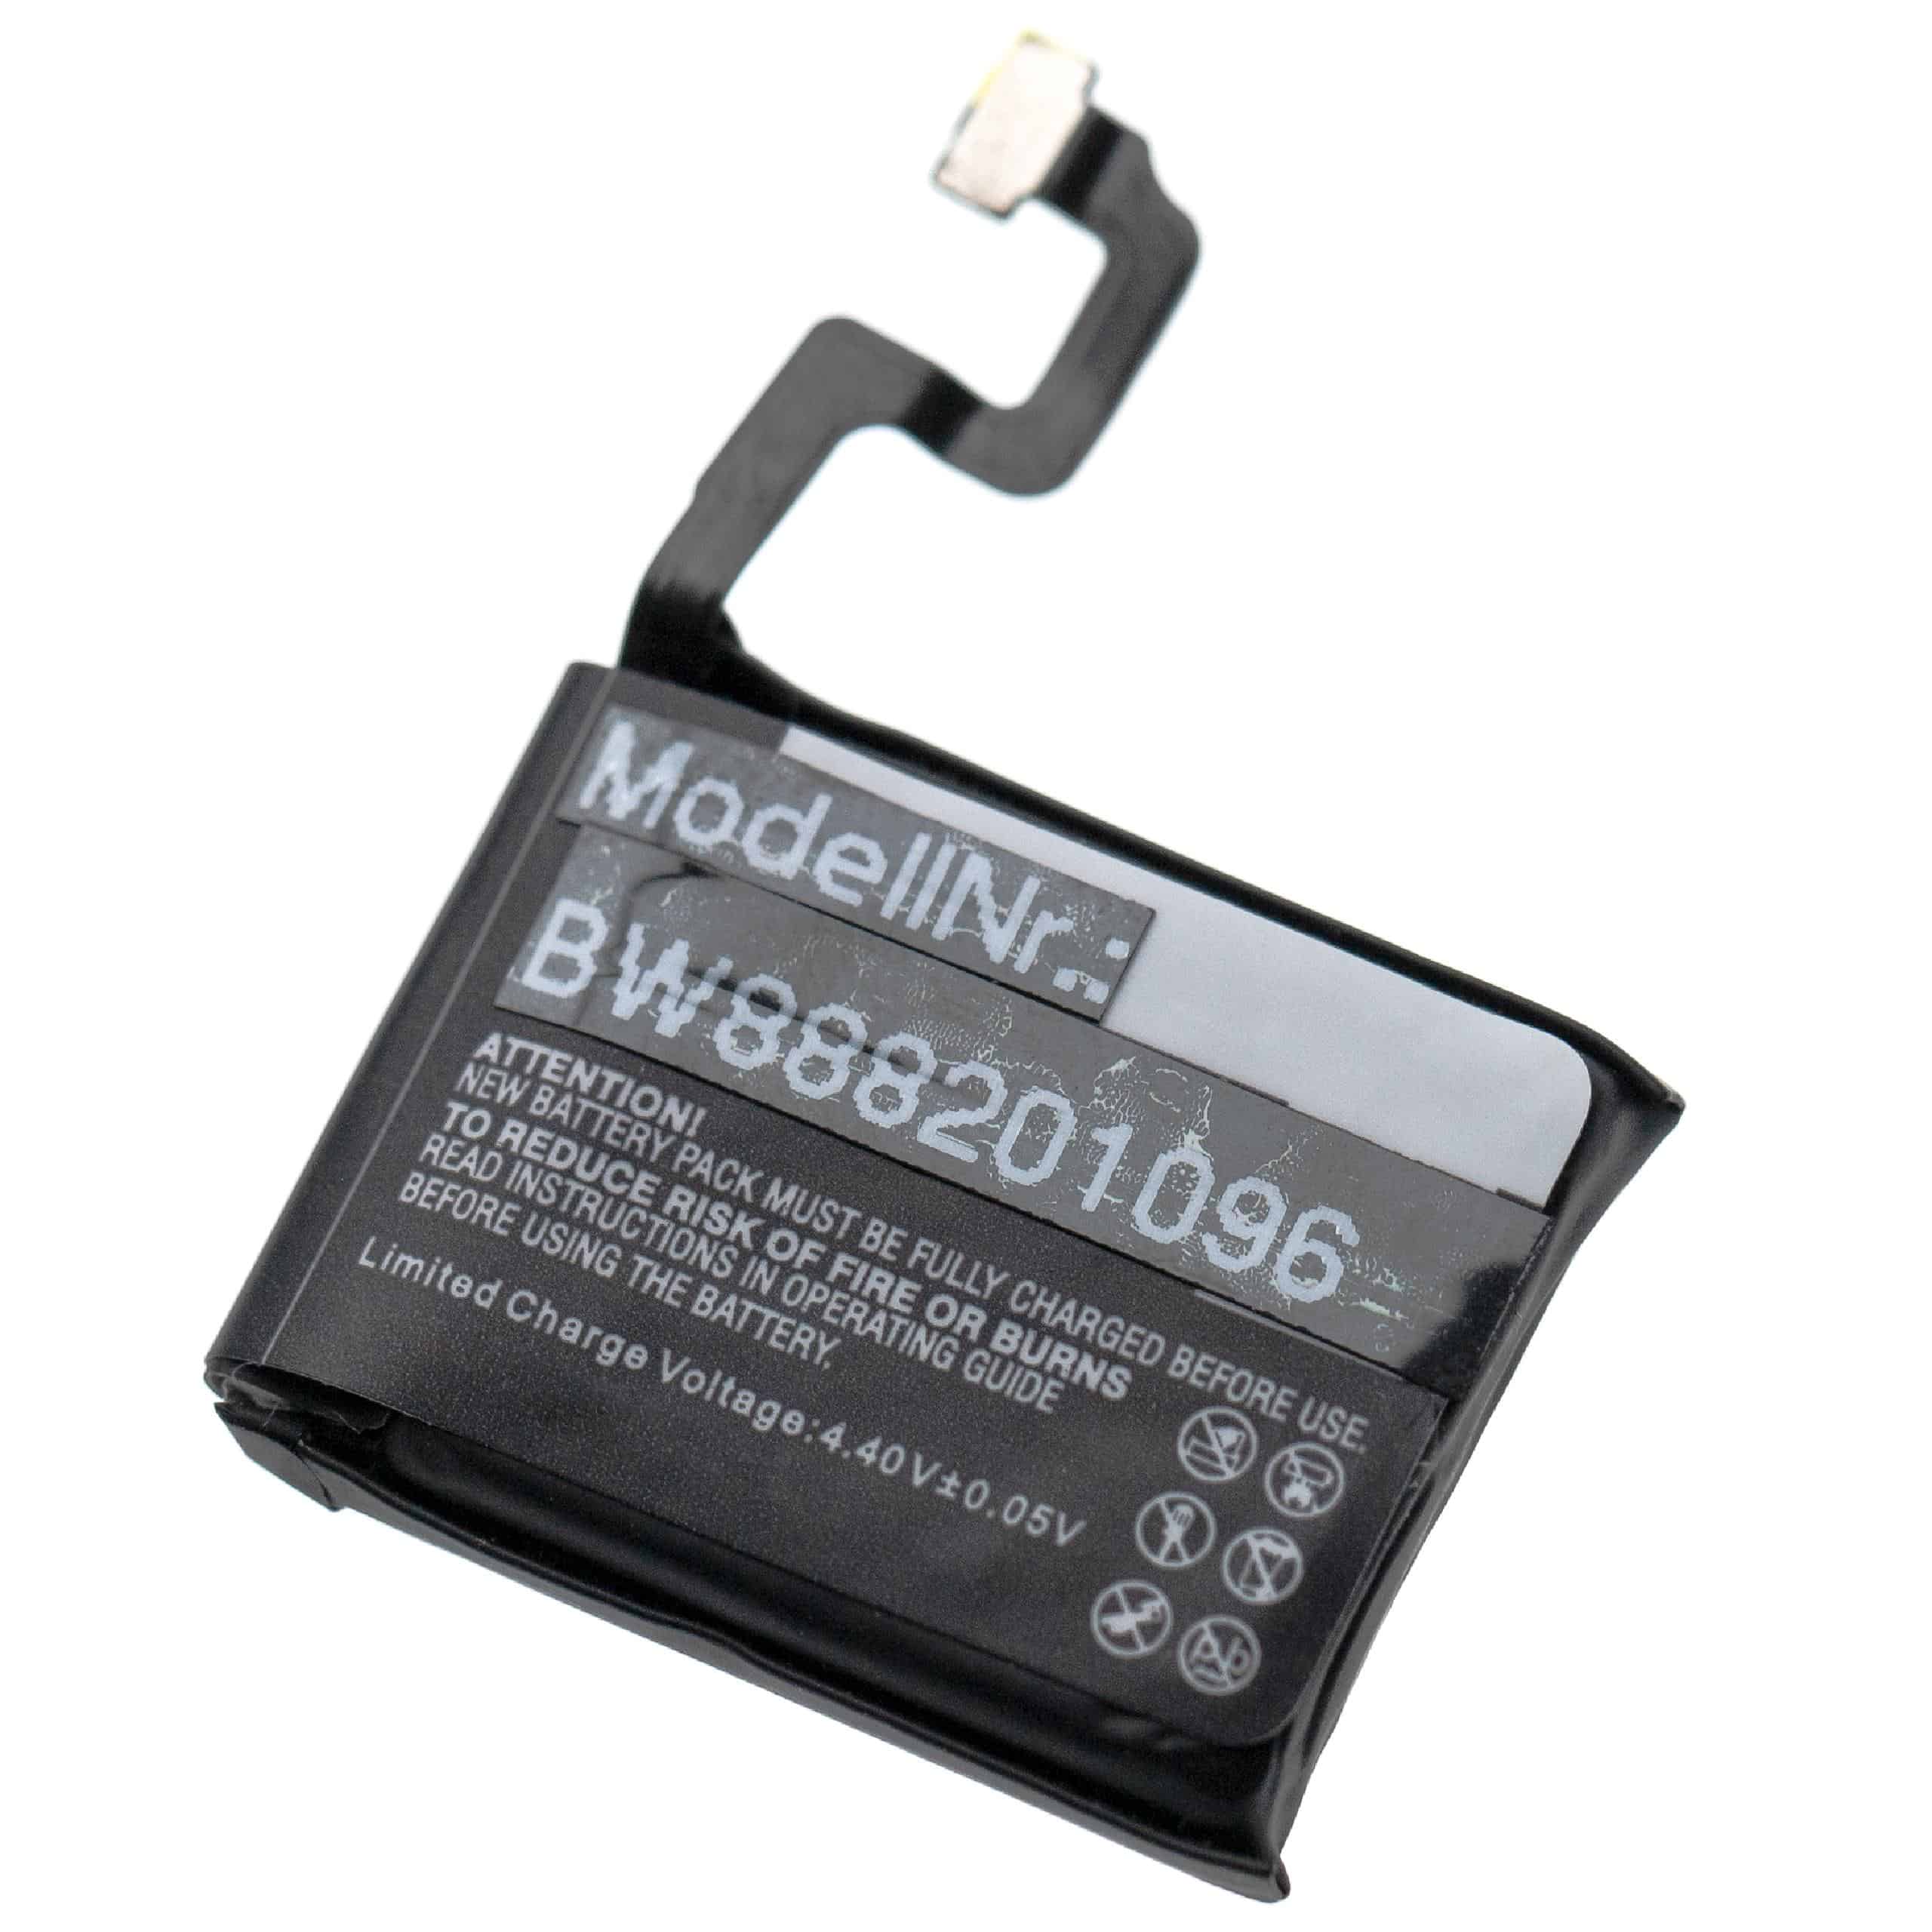 Smartwatch Battery Replacement for Apple A2058 - 220mAh 3.85V Li-polymer